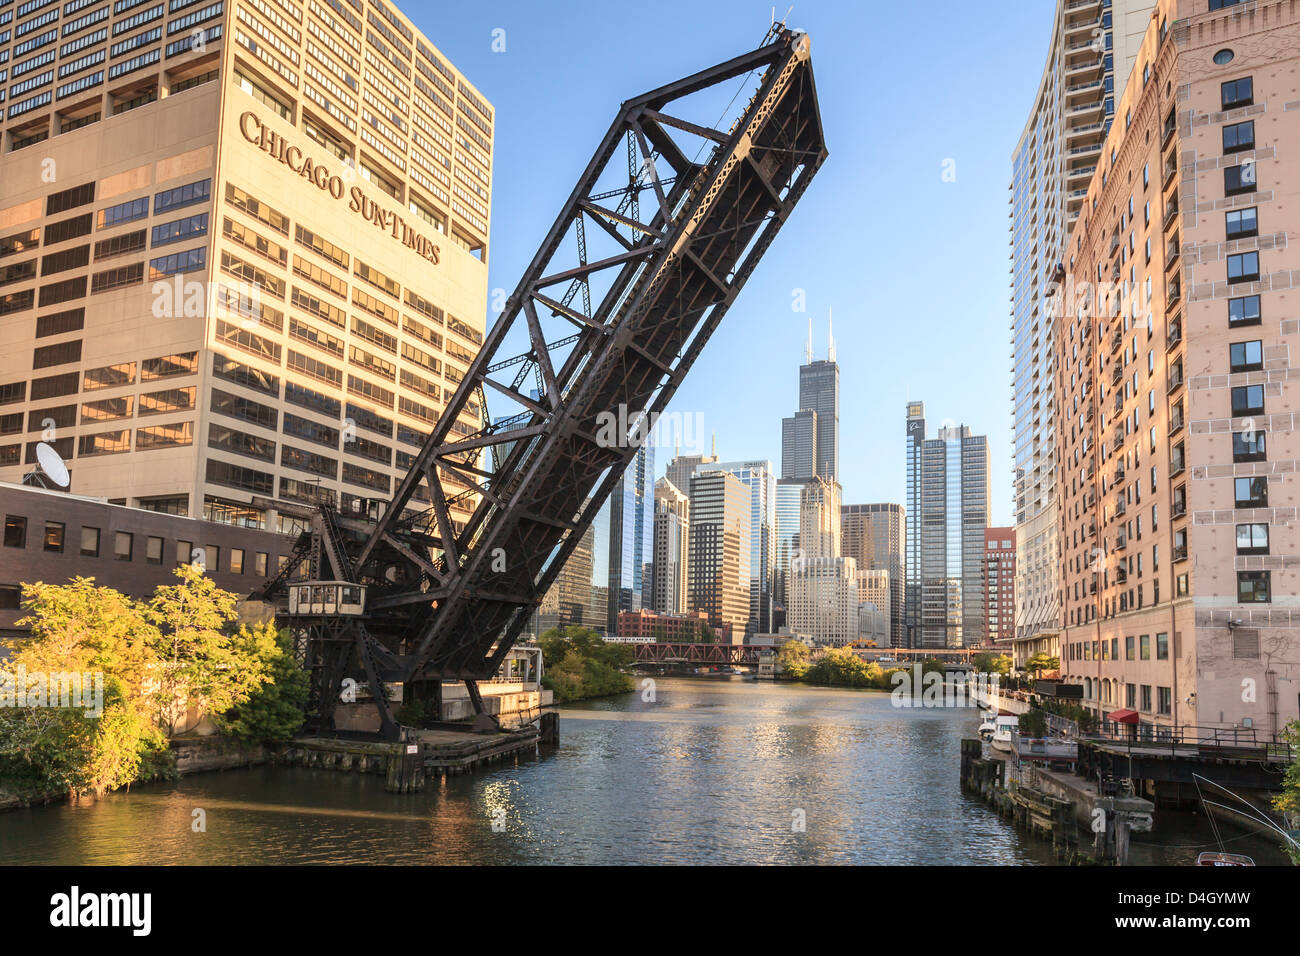 Chicago River and the West Loop area, Willis Tower, Chicago, Illinois, USA Stock Photo